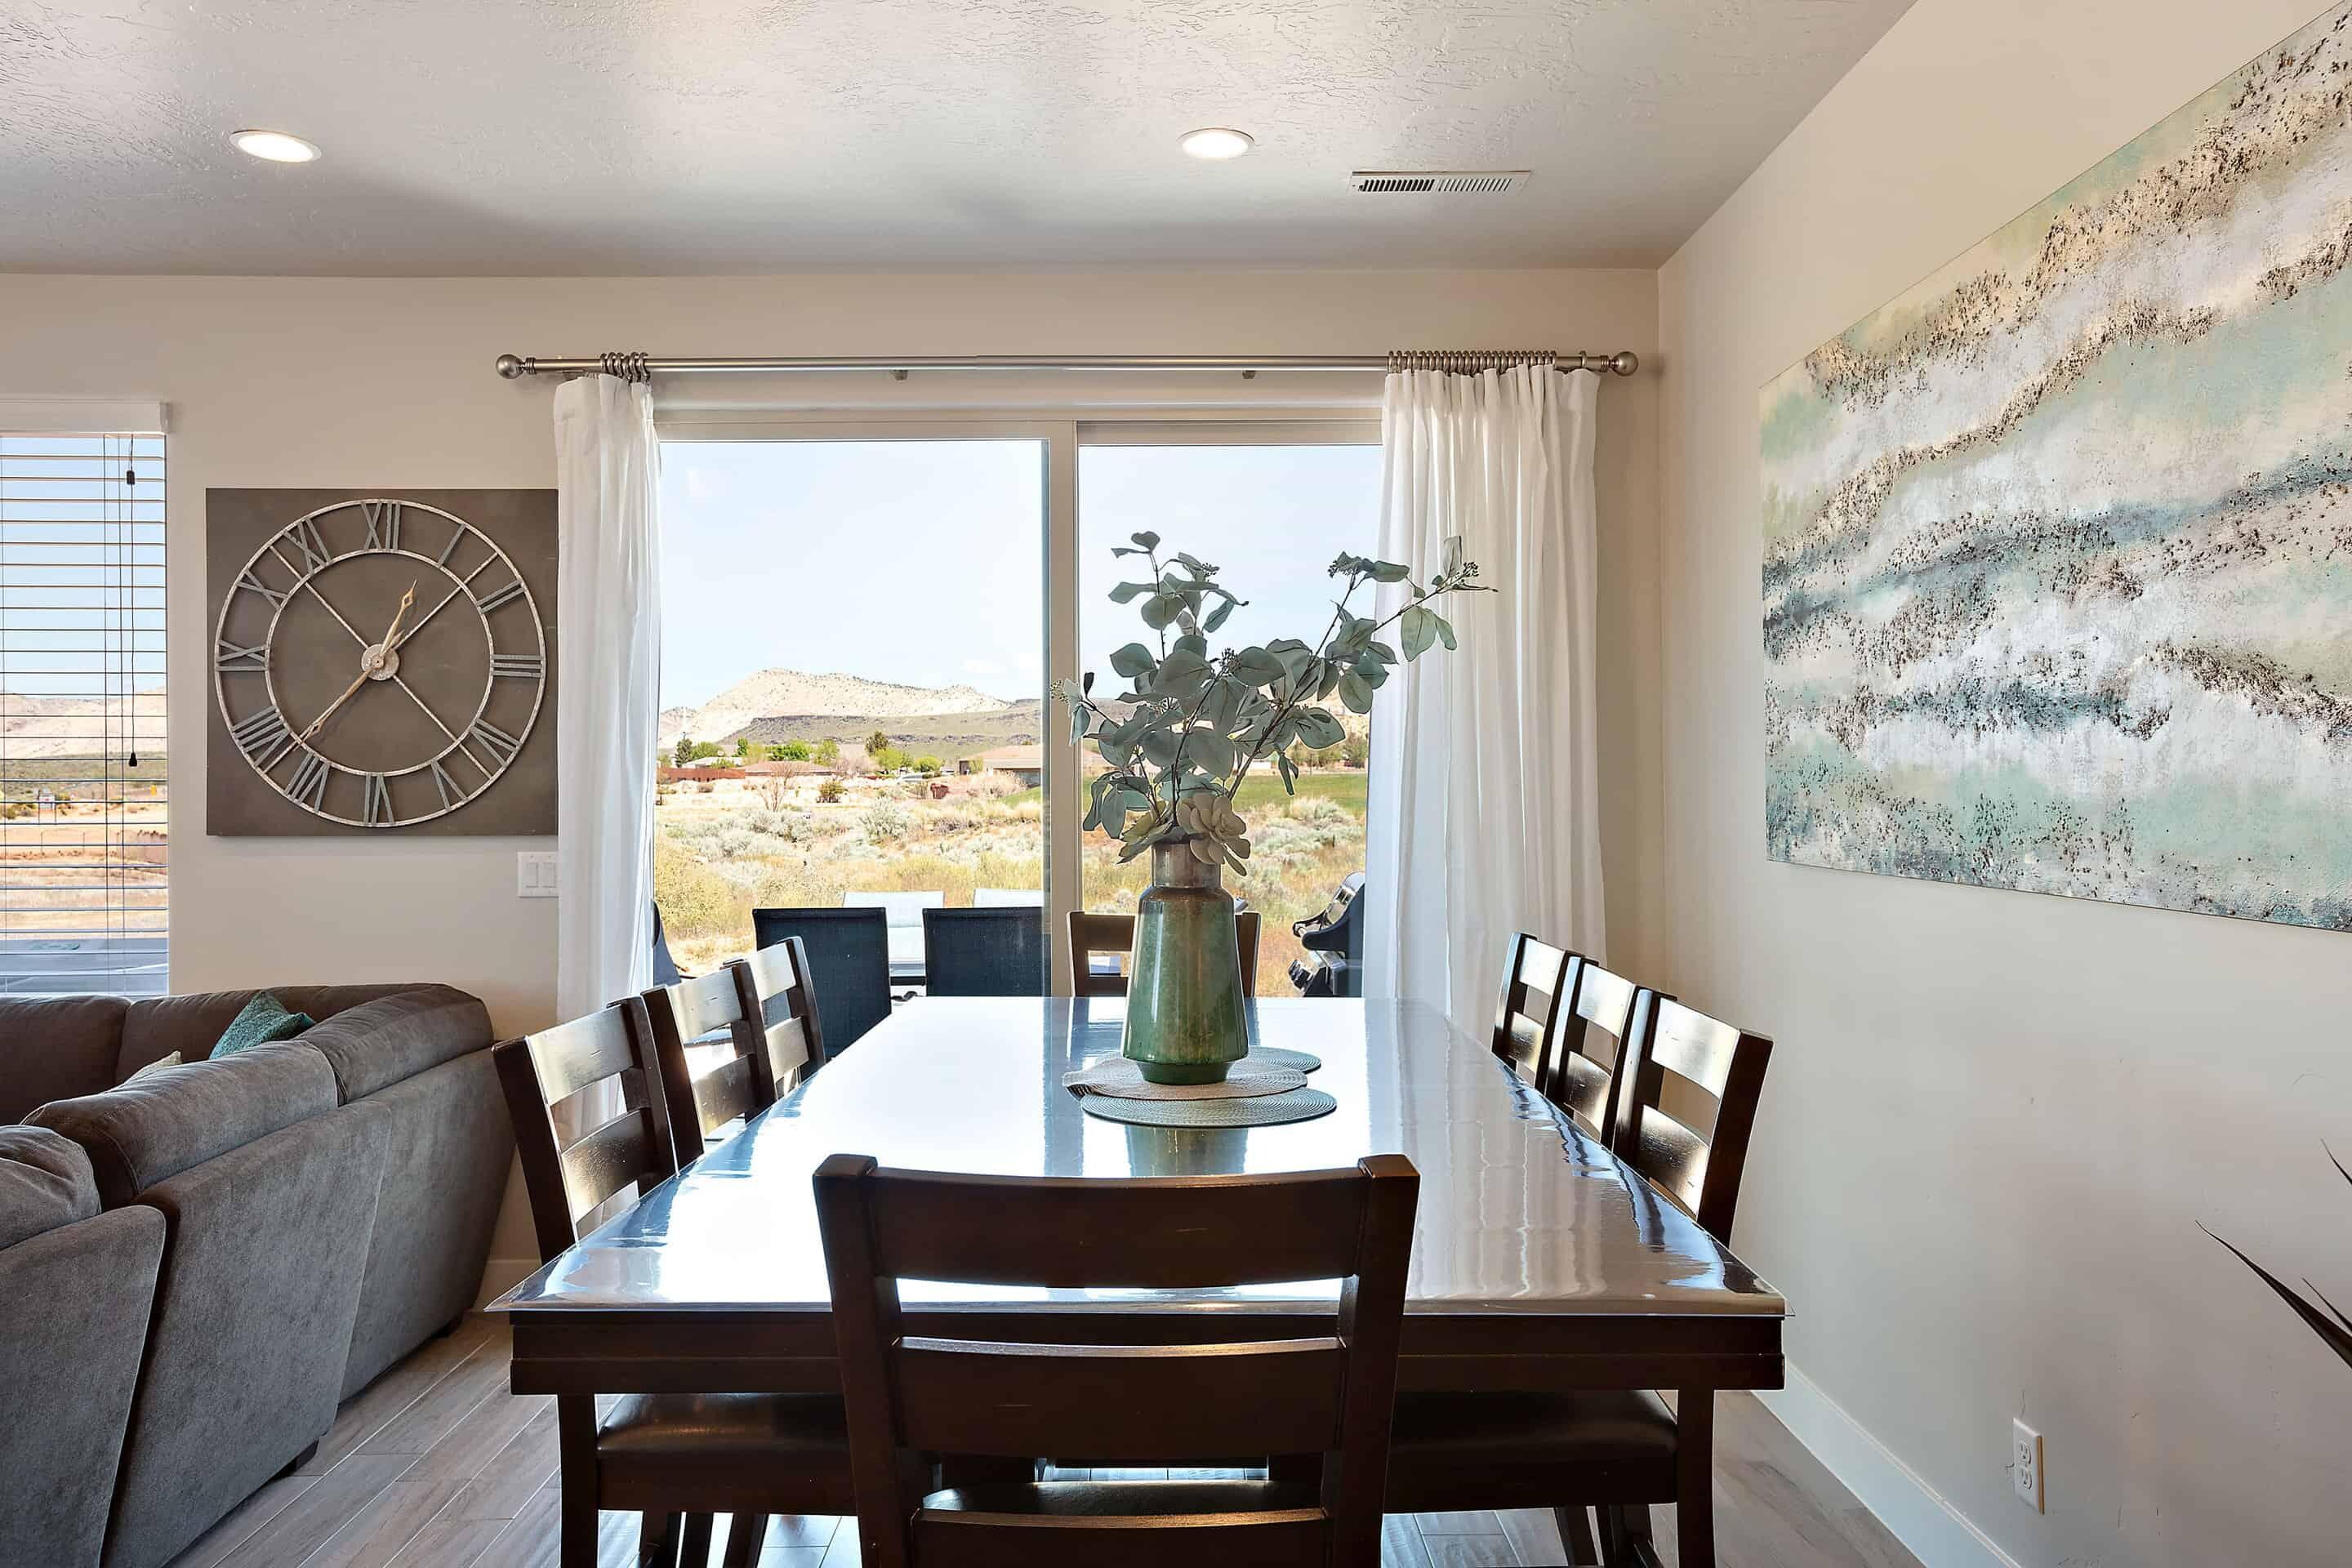 Share memories and stories while enjoying a family style meal around the Dining Table.